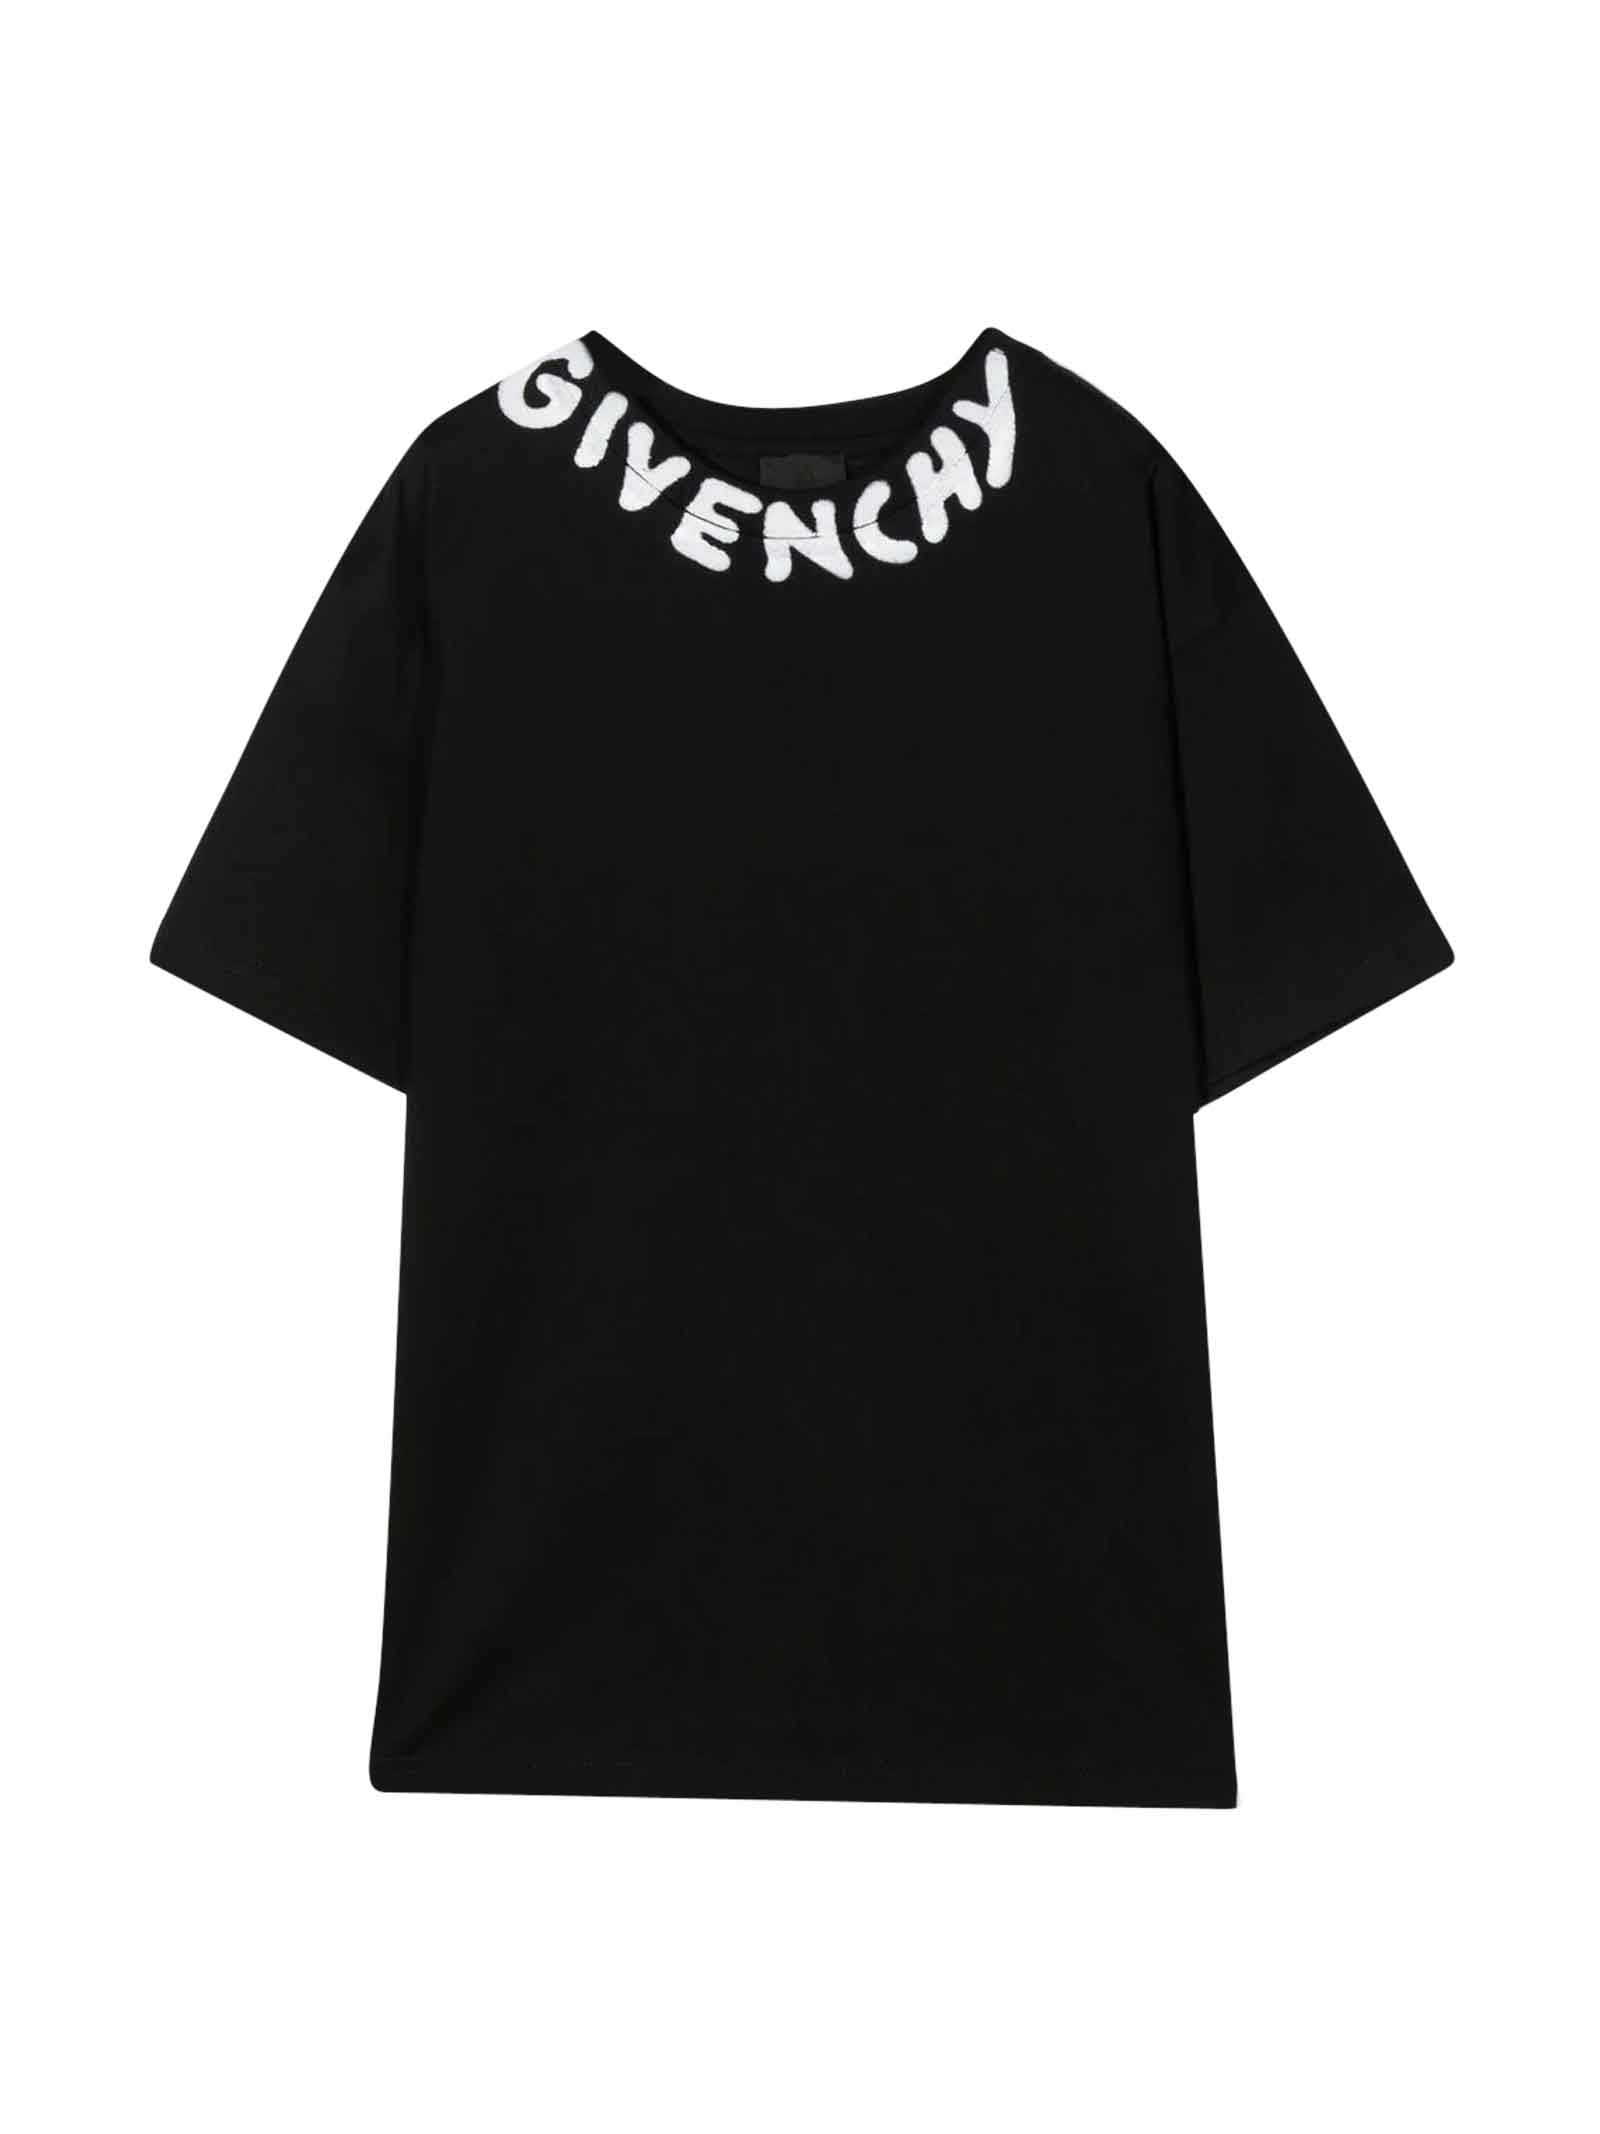 Givenchy Boy T-shirt With Print